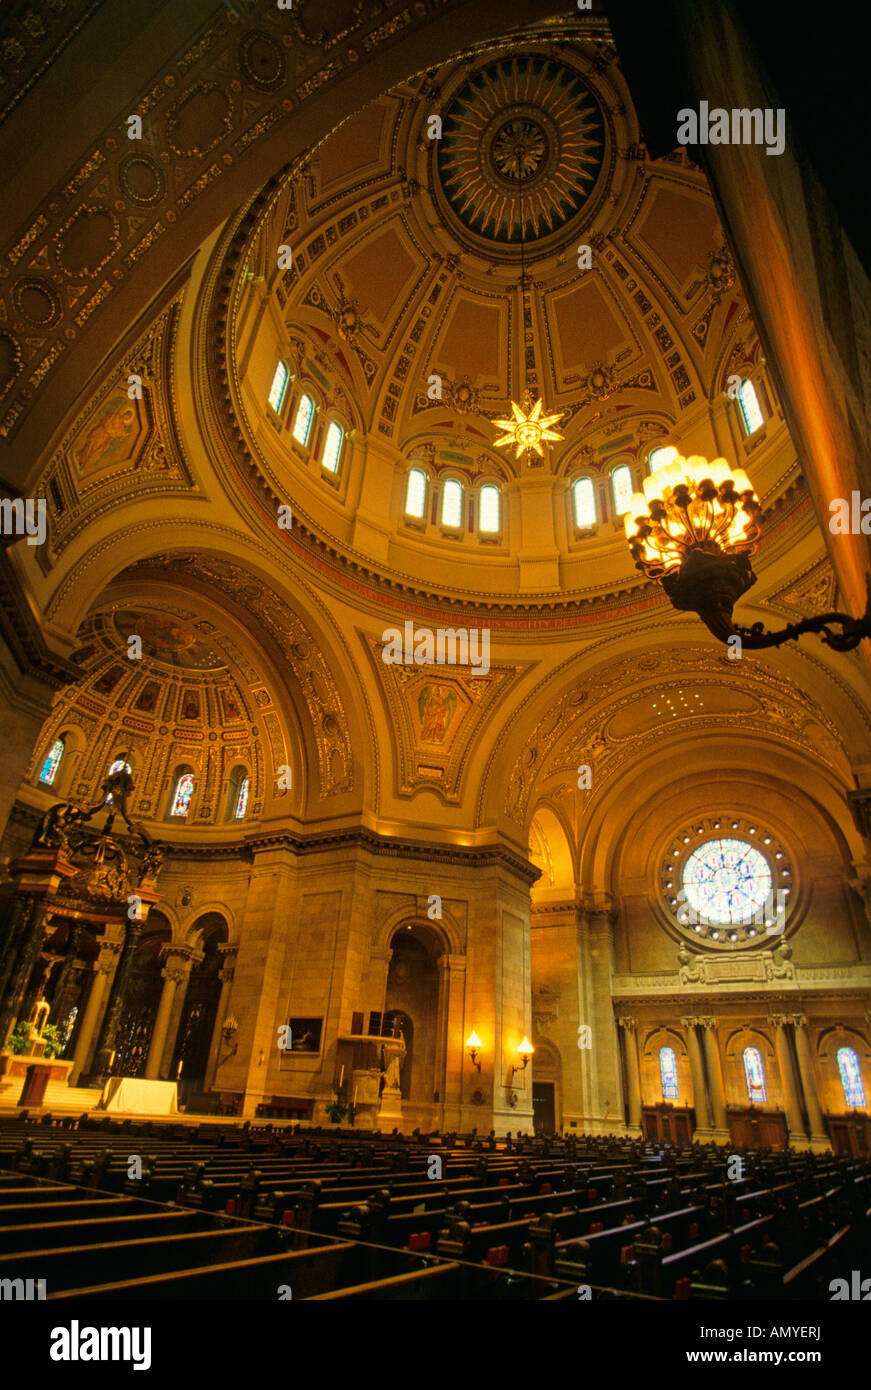 Ornate Interior Of Saint Paul Cathedral In St Paul